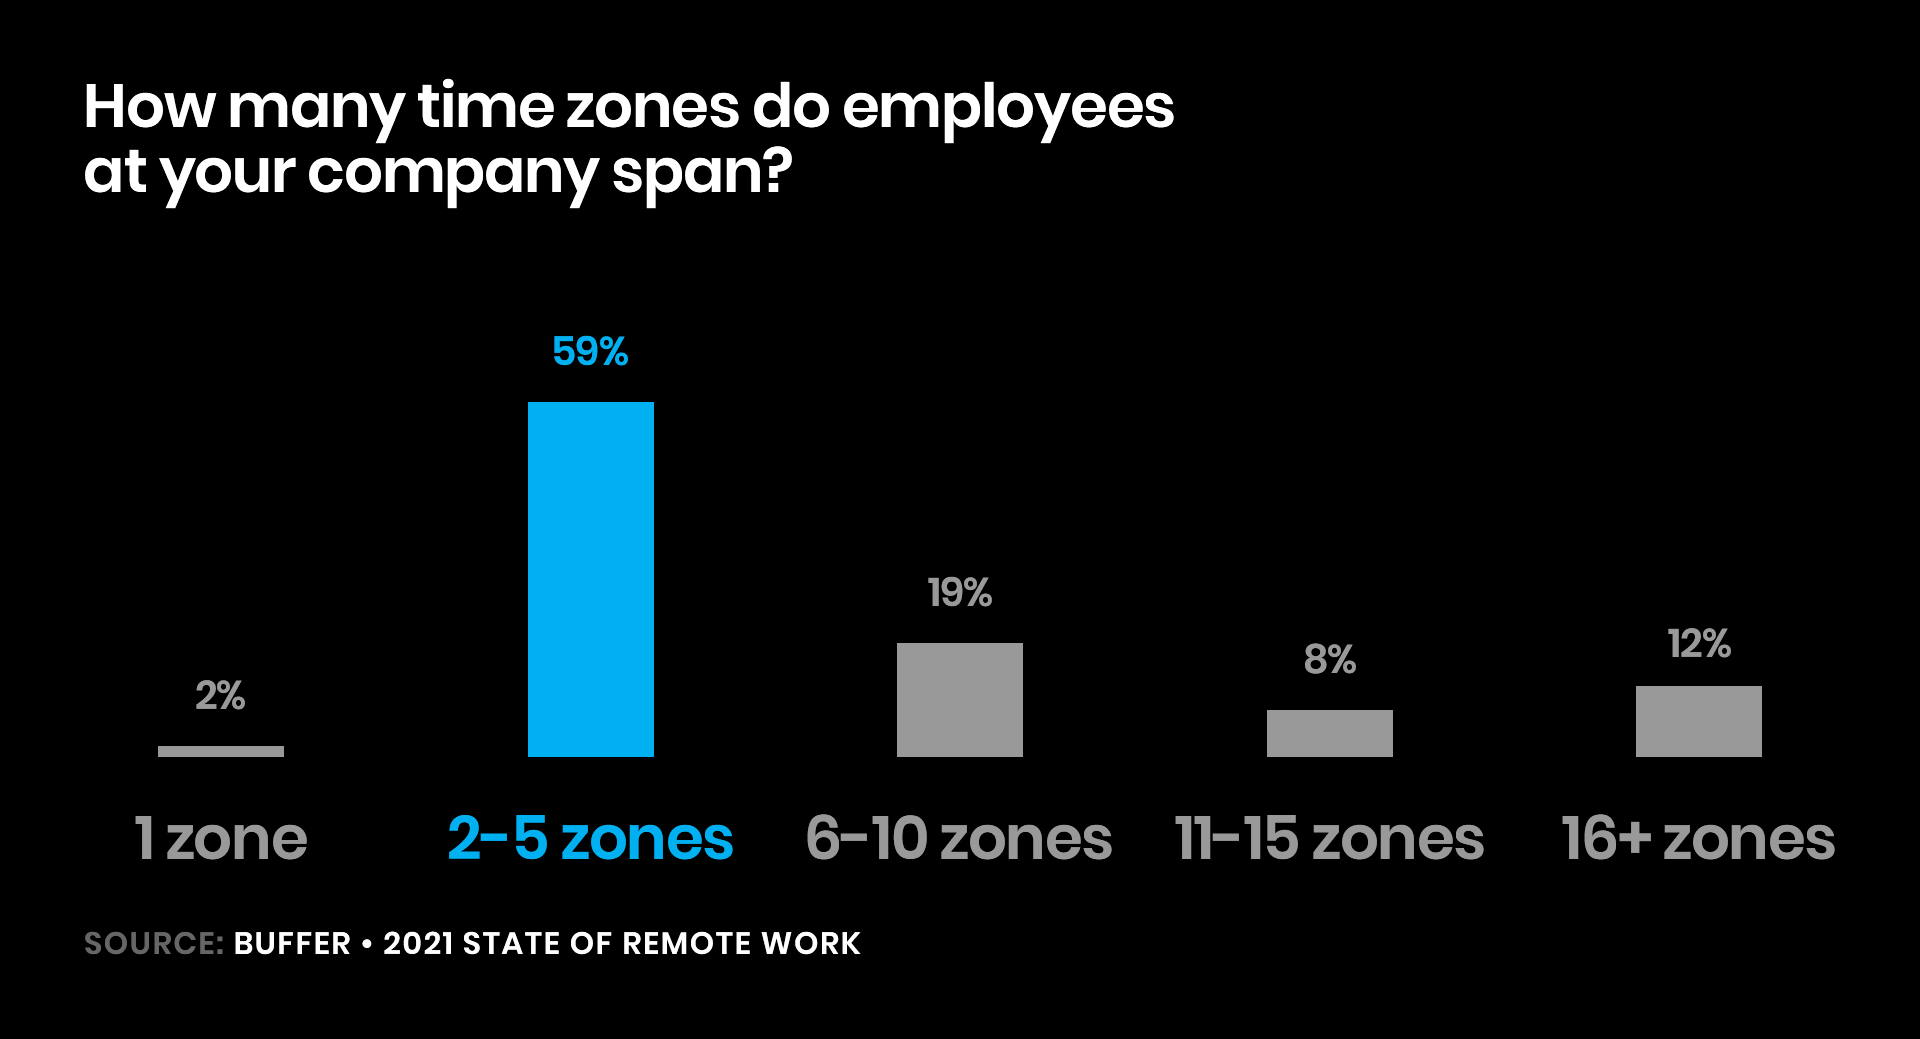 A chart showing how many time zones companies span, with 59% of companies covering between 2 and 5 time zones